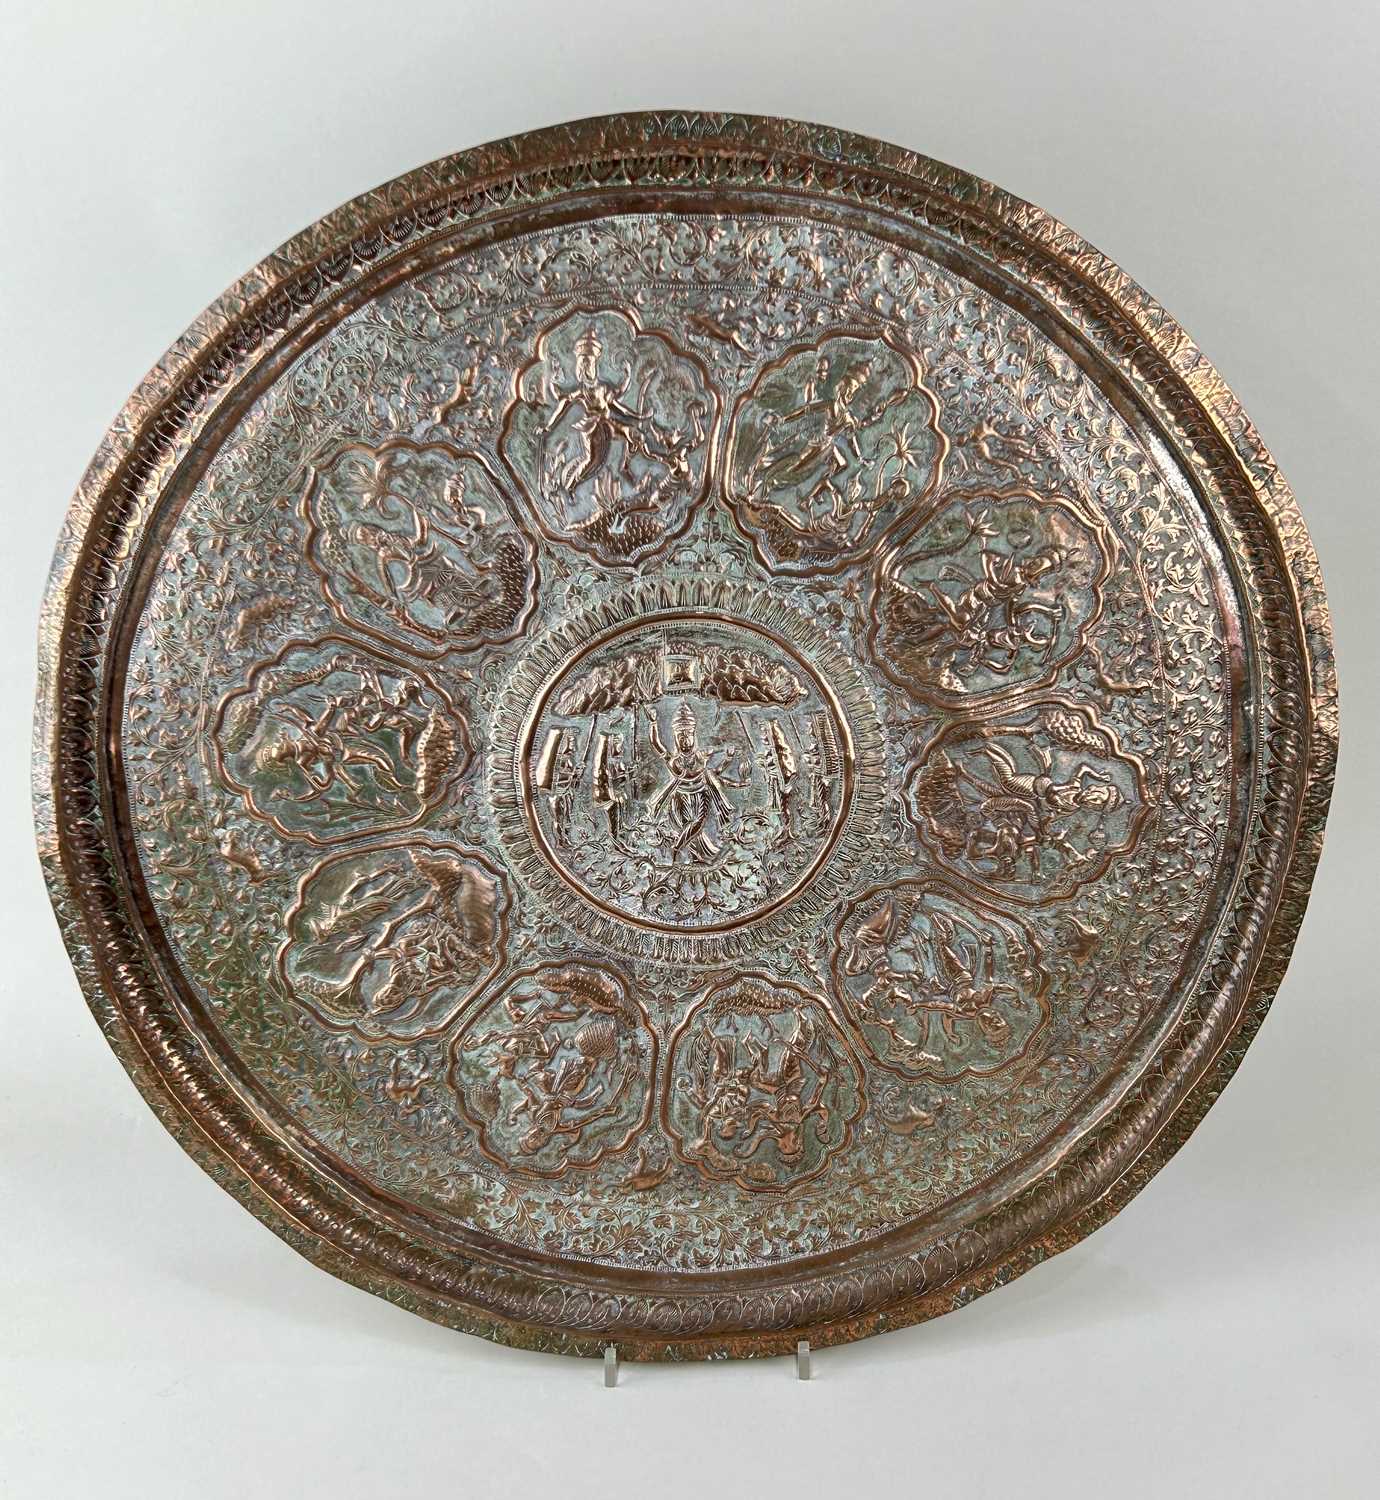 A 19th century Indian Mughal copper charger decorated in repousse and chasing portraying the